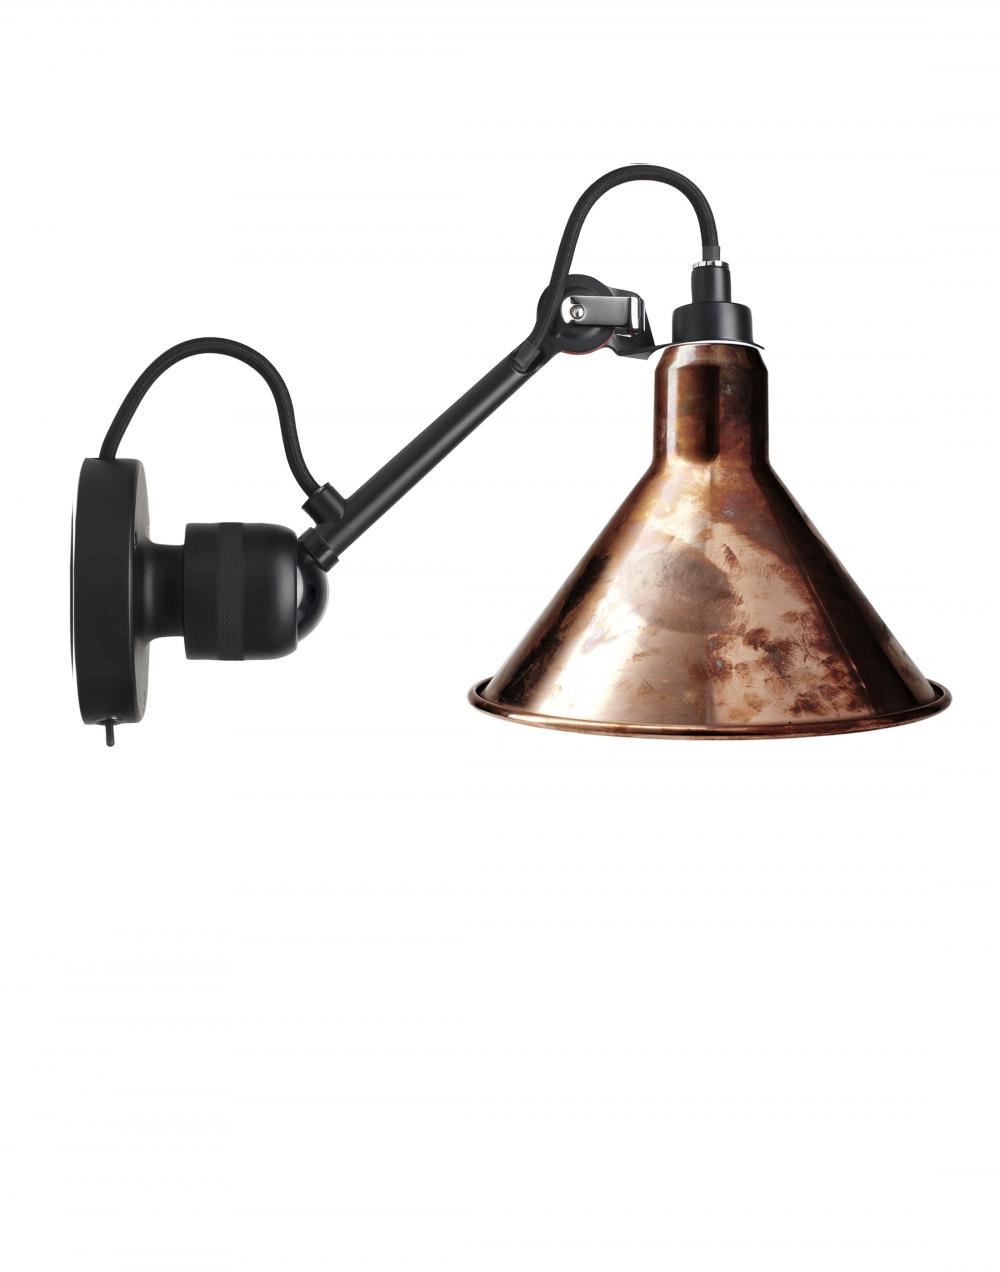 Lampe Gras 304 Small Wall Light Black Arm Raw Copper Shade Conic Integral Switch